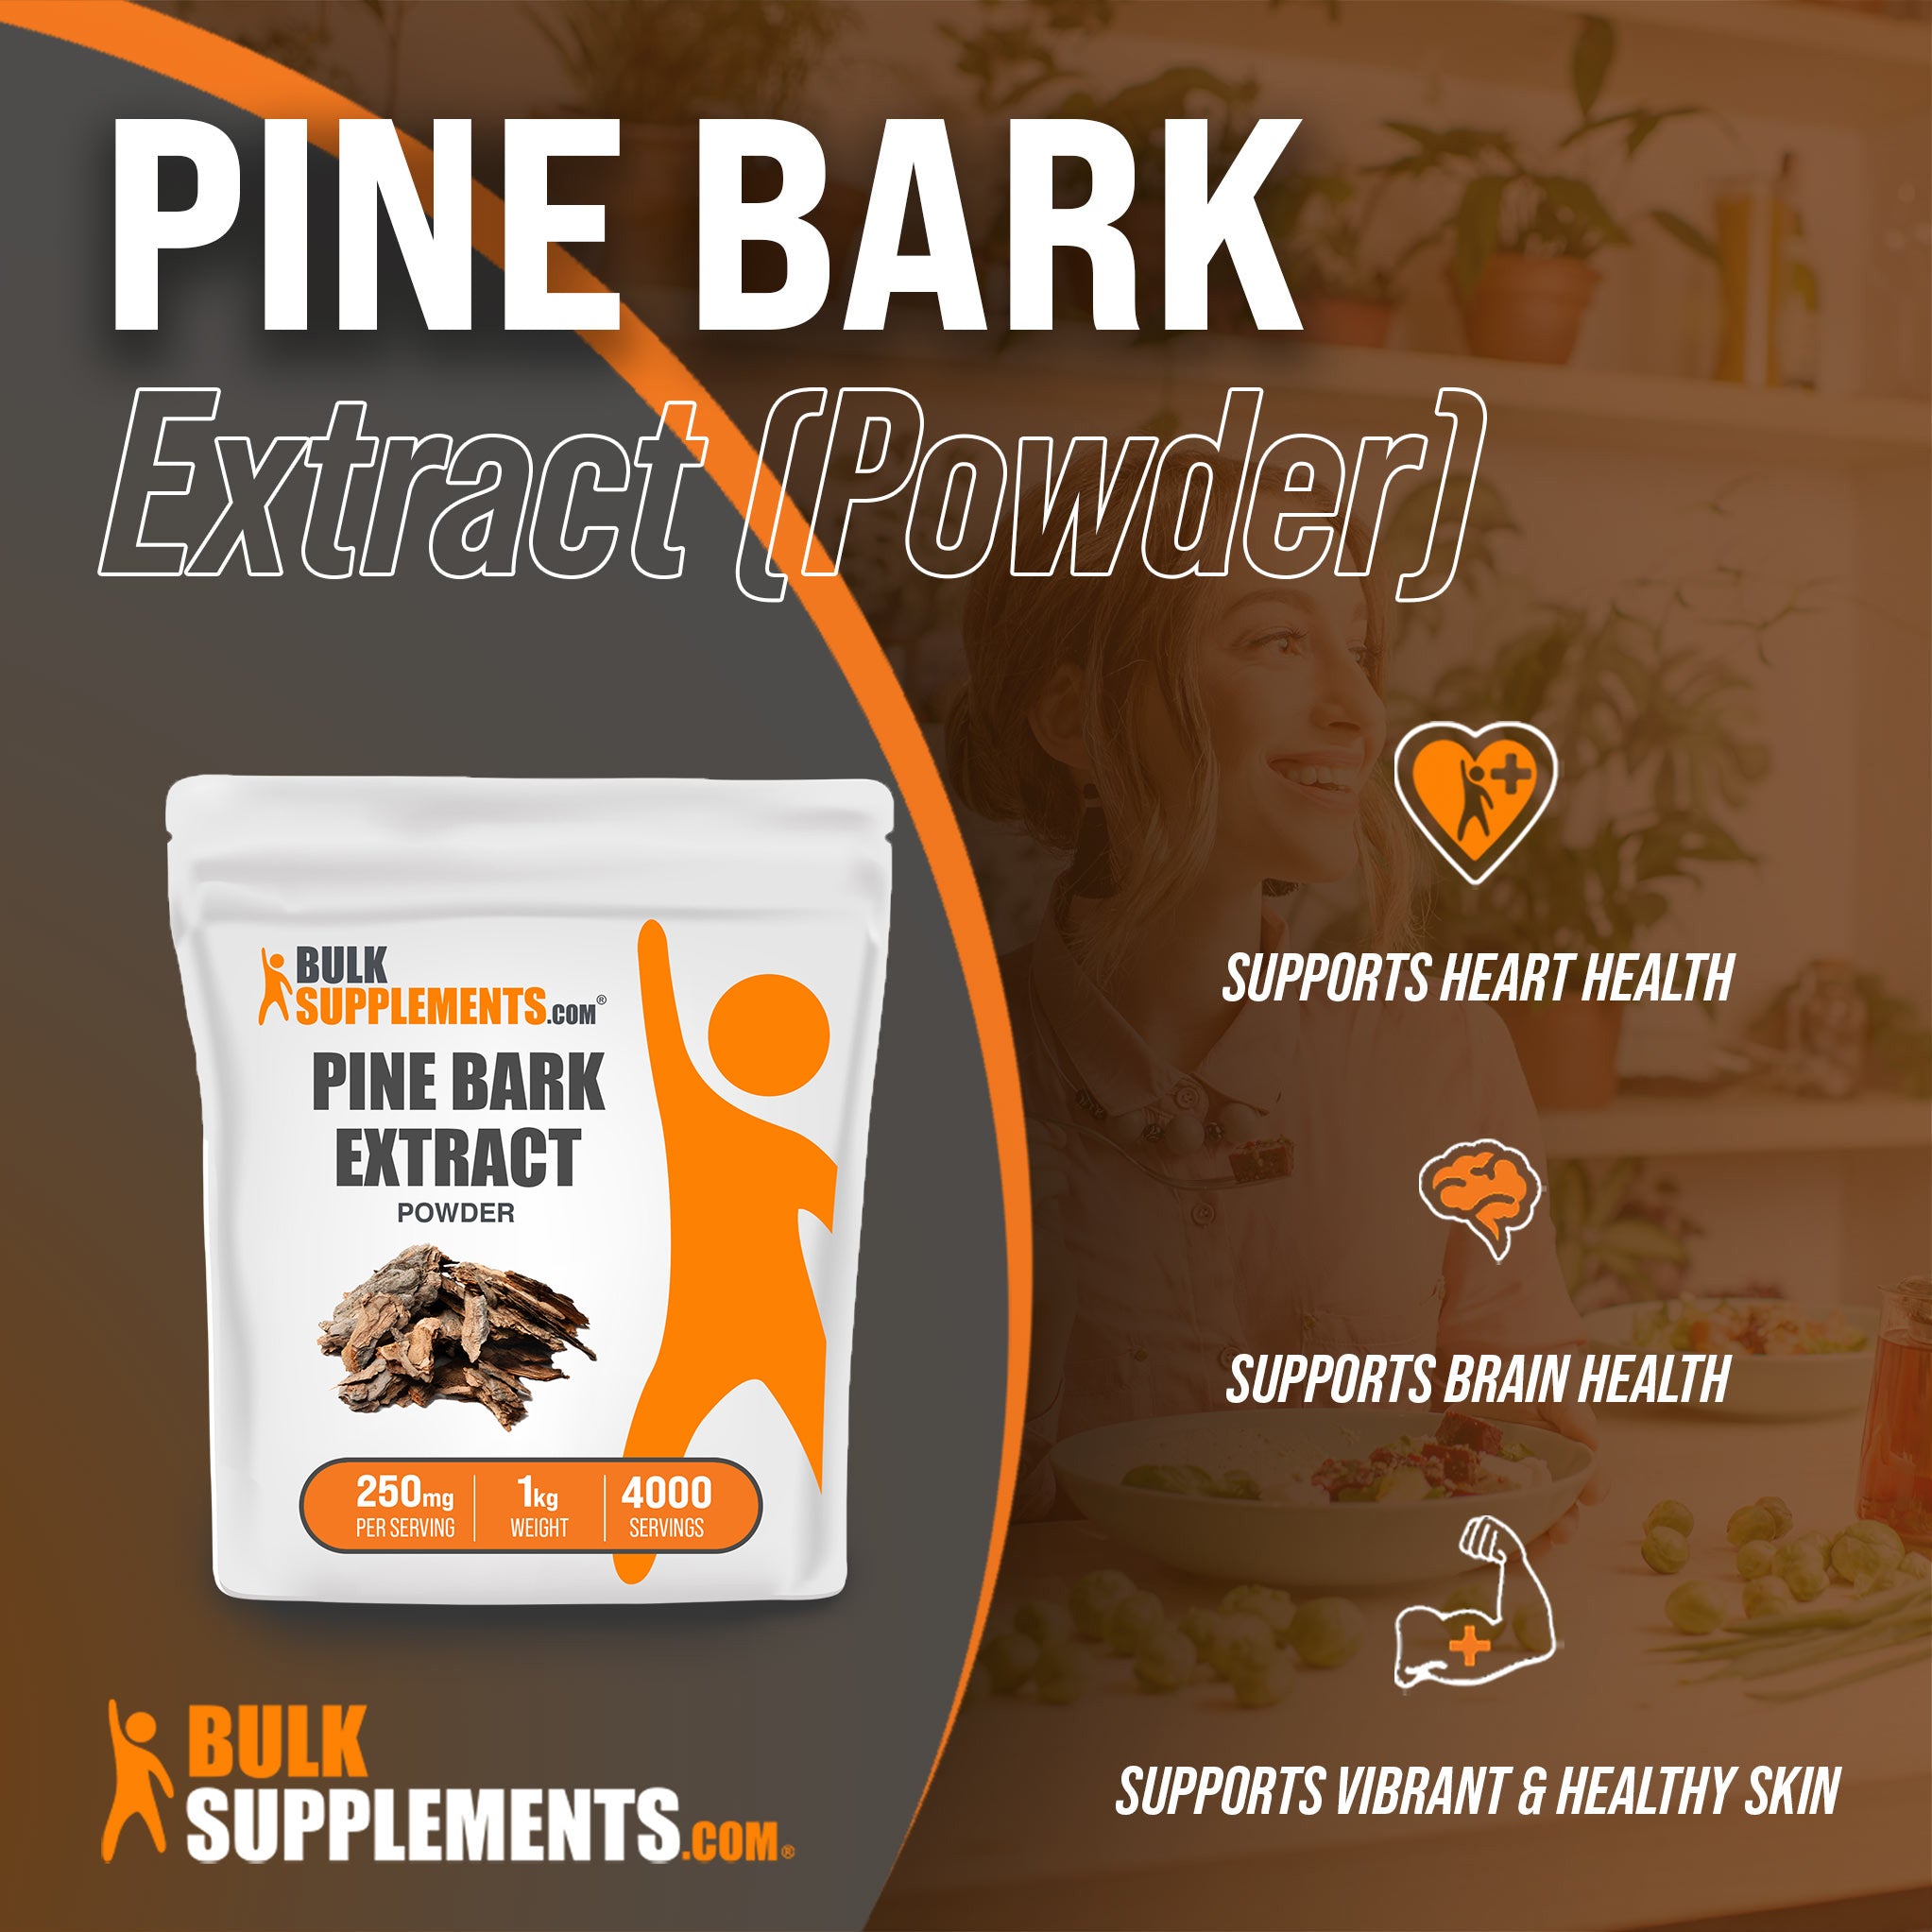 Benefits of Pine Bark Extract: supports heart health, supports brain health, supports vibrant and healthy skin